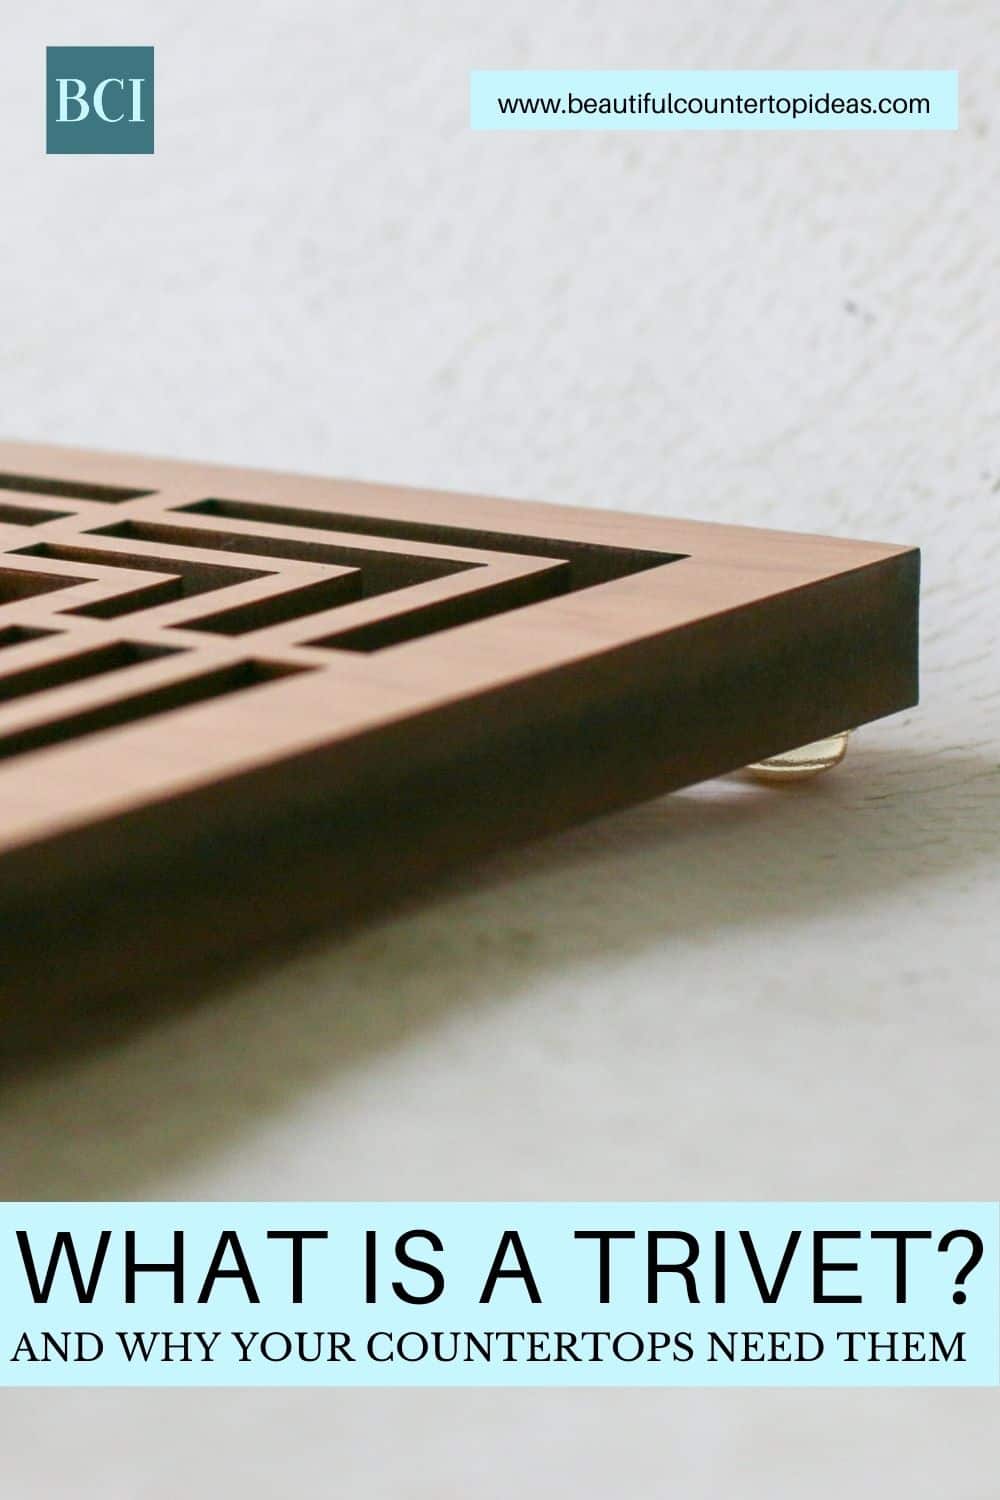 Have you found yourself wondering "What is a trivet?" Find out the answer and why they are essential to keeping kitchen countertops looking great.